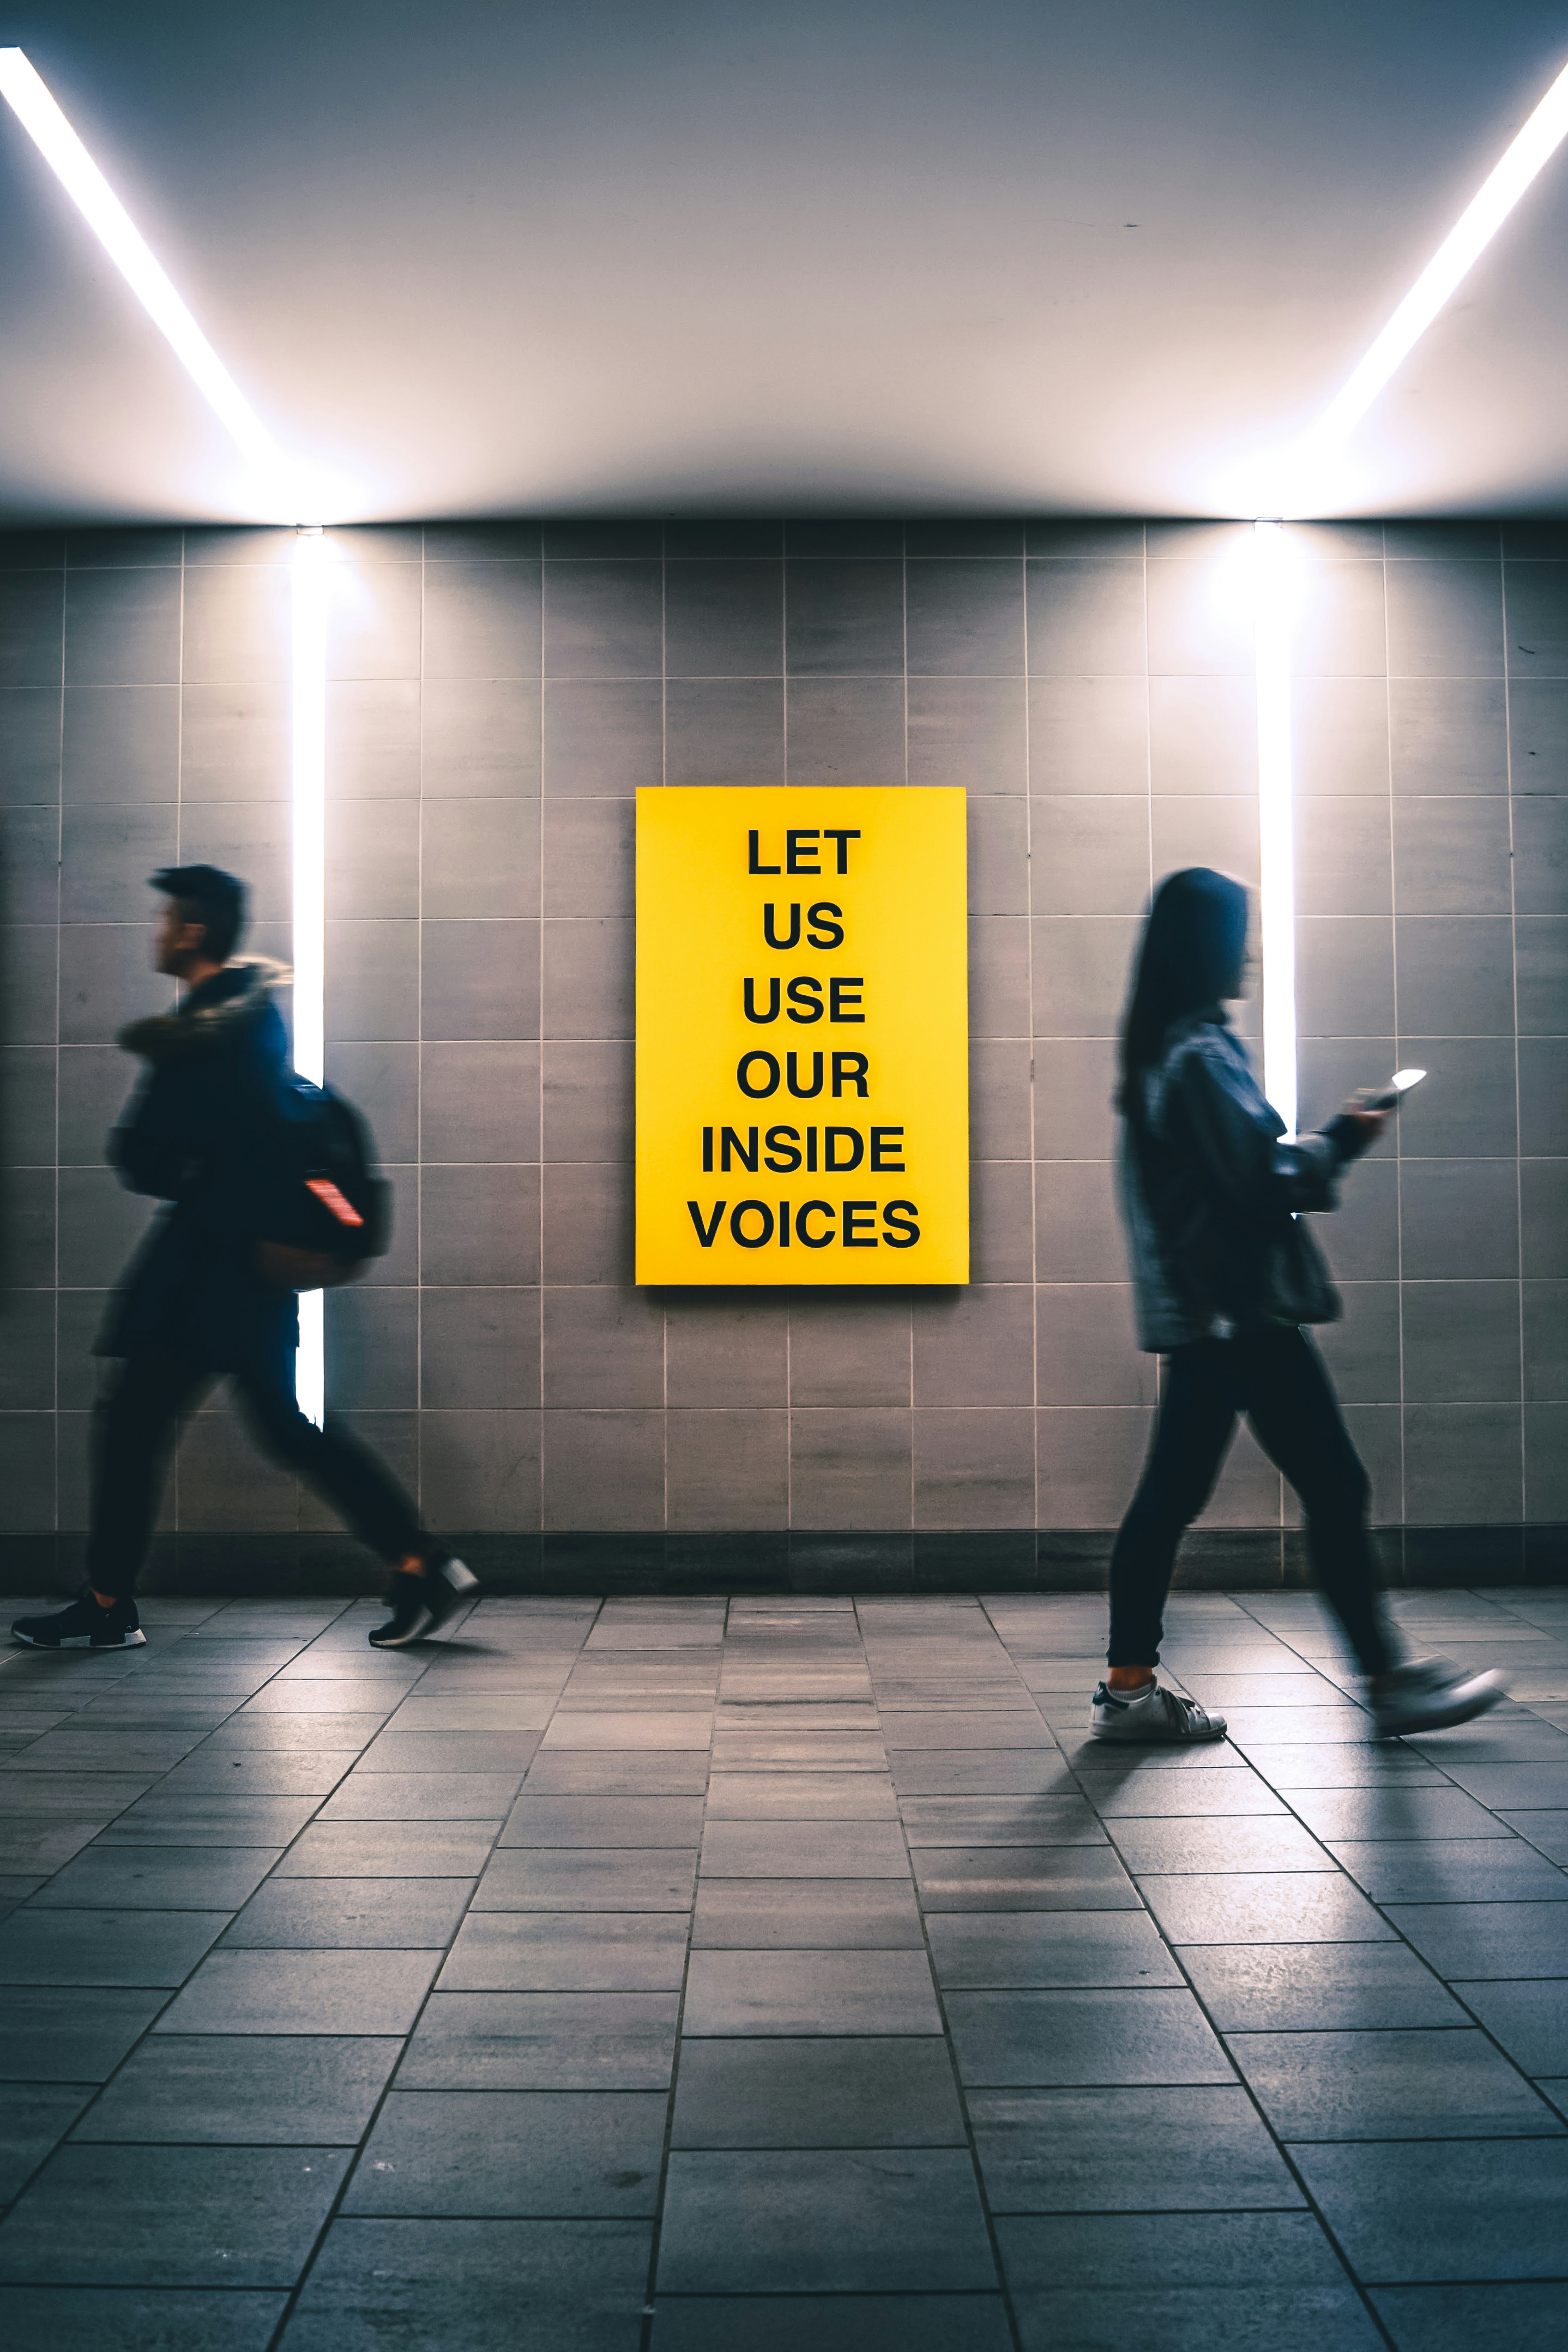 man and woman walking inside building near Let us use our inside voices sign